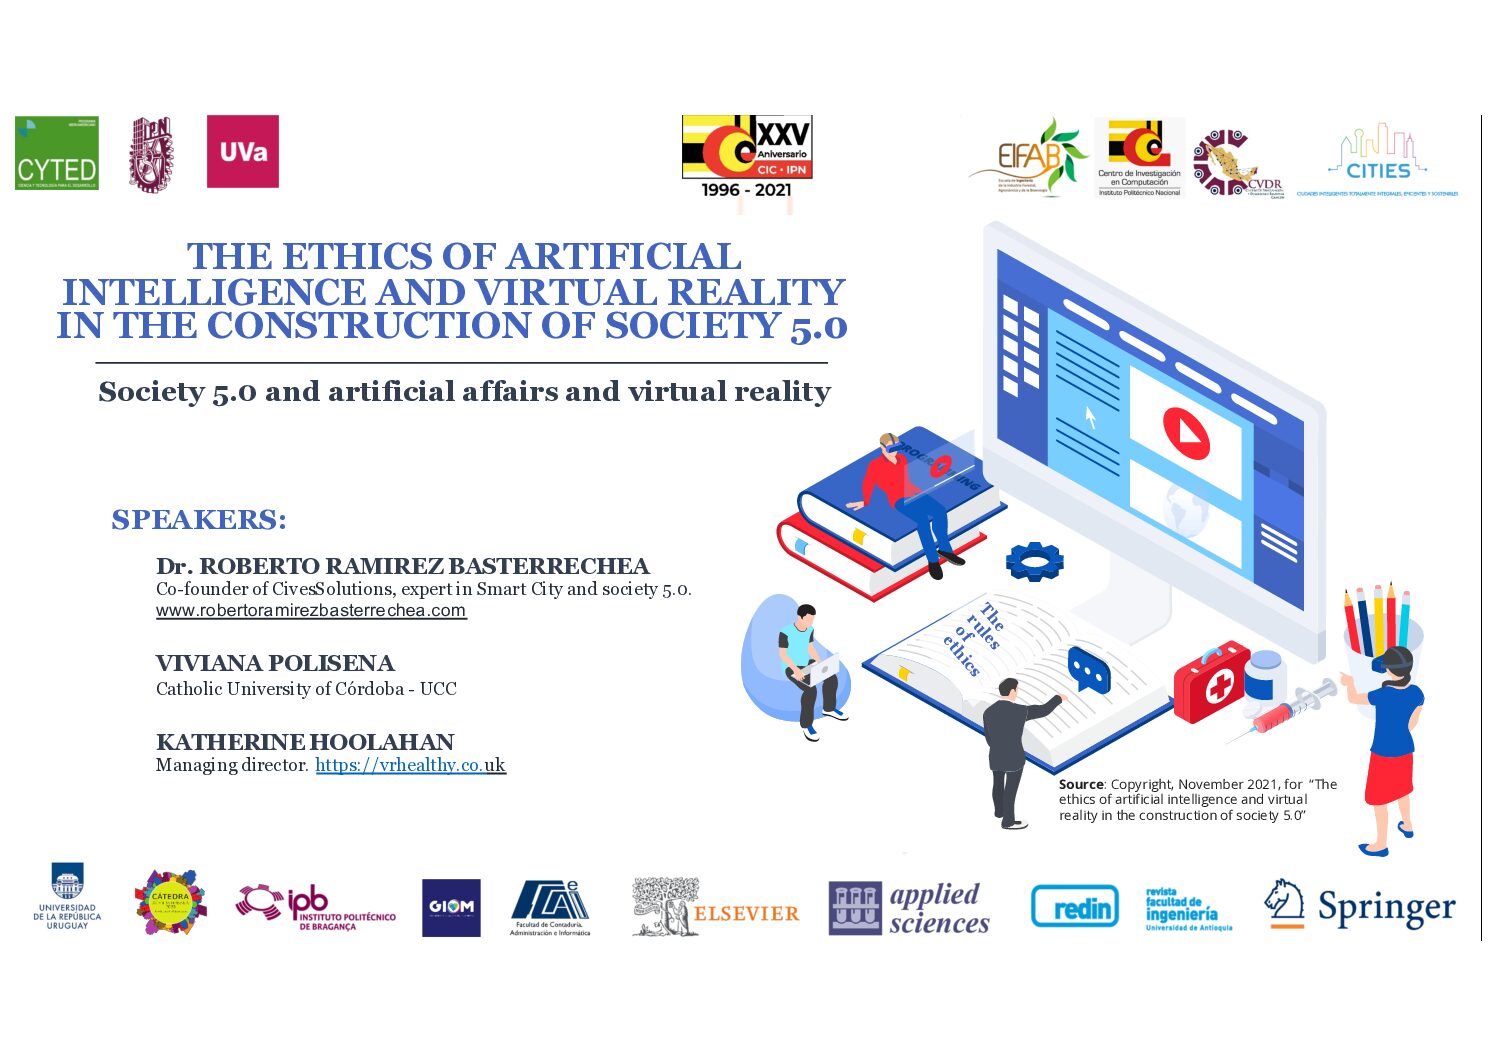 THE ETHICS OF ARTIFICIAL INTELLIGENCE AND VIRTUAL REALITY IN THE CONSTRUCTION OF SOCIETY 5.0